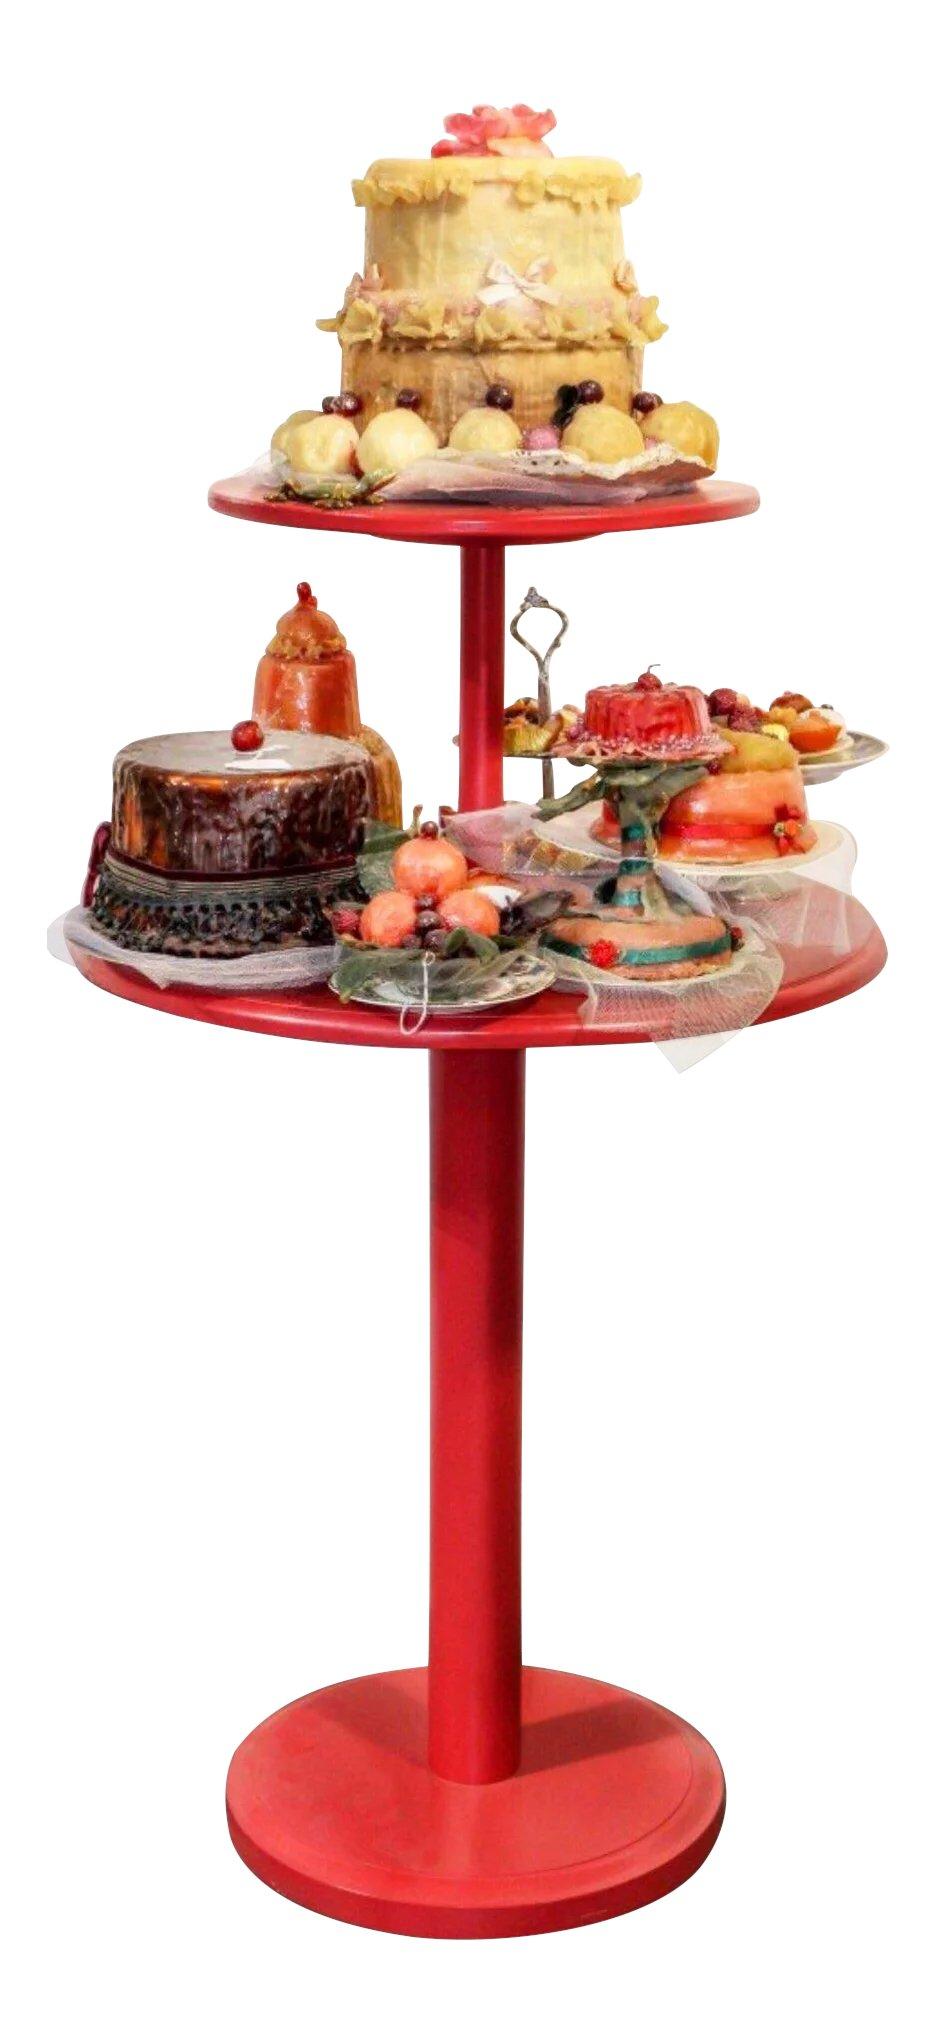 British Pop Art Candy & Cake Realist Mixed Media Sculpture, Red wood pedestal

Unbelievably lifelike dessert sculptural grouping a la Wayne Thiebaud.  Substantial hand painted solid wood pedestal features a smorgasbord of earthly delights.  